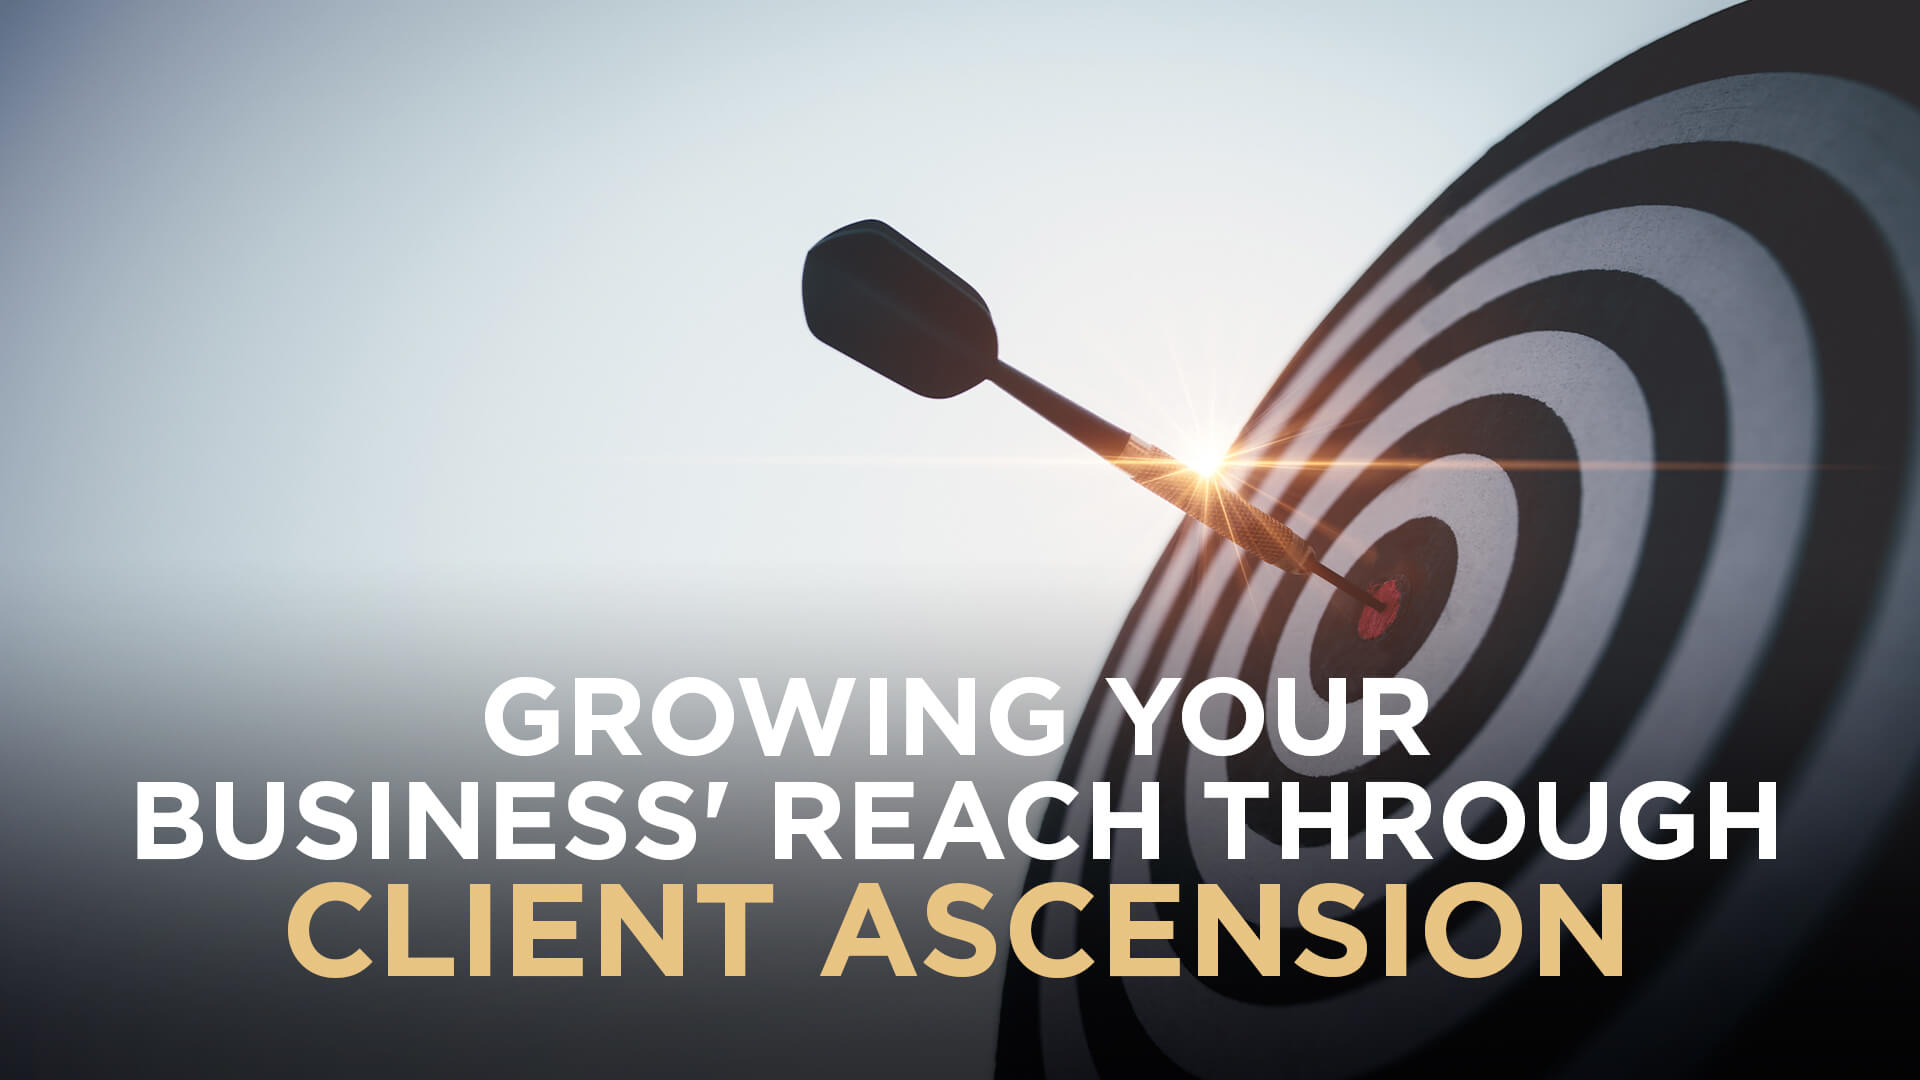 Growing Your Business' Reach Through Client Ascension (1)